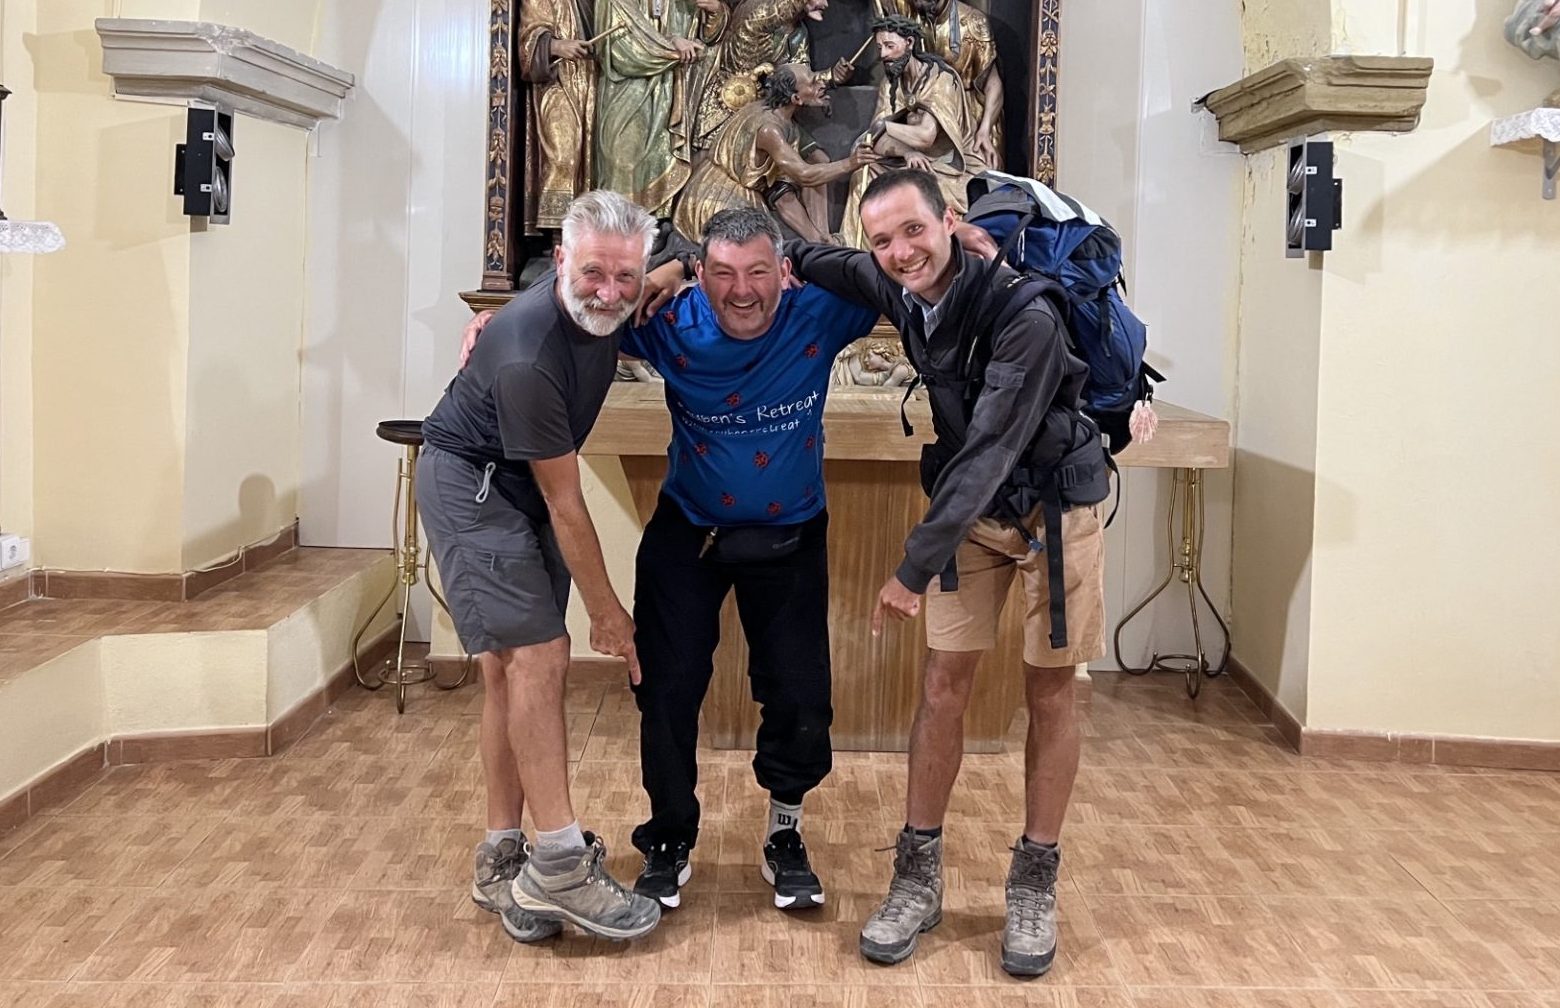 Three men stood in a monastery pointing at shoes